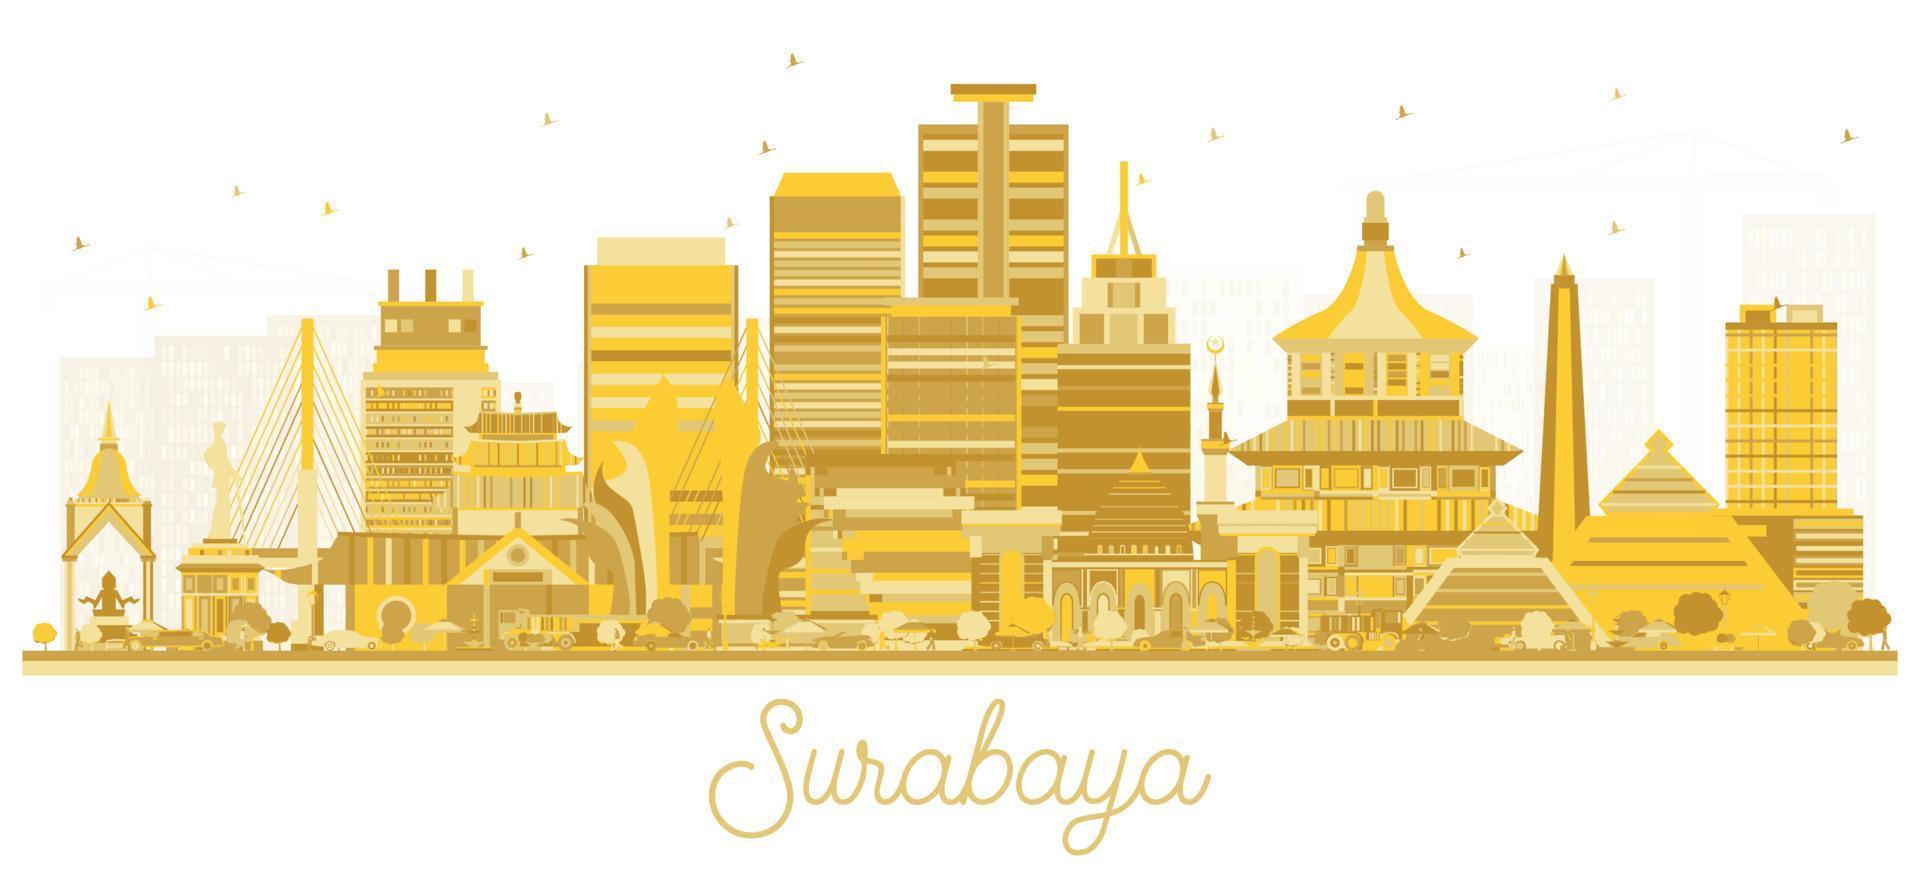 Surabaya Indonesia City Skyline with Golden Buildings Isolted on White. vector